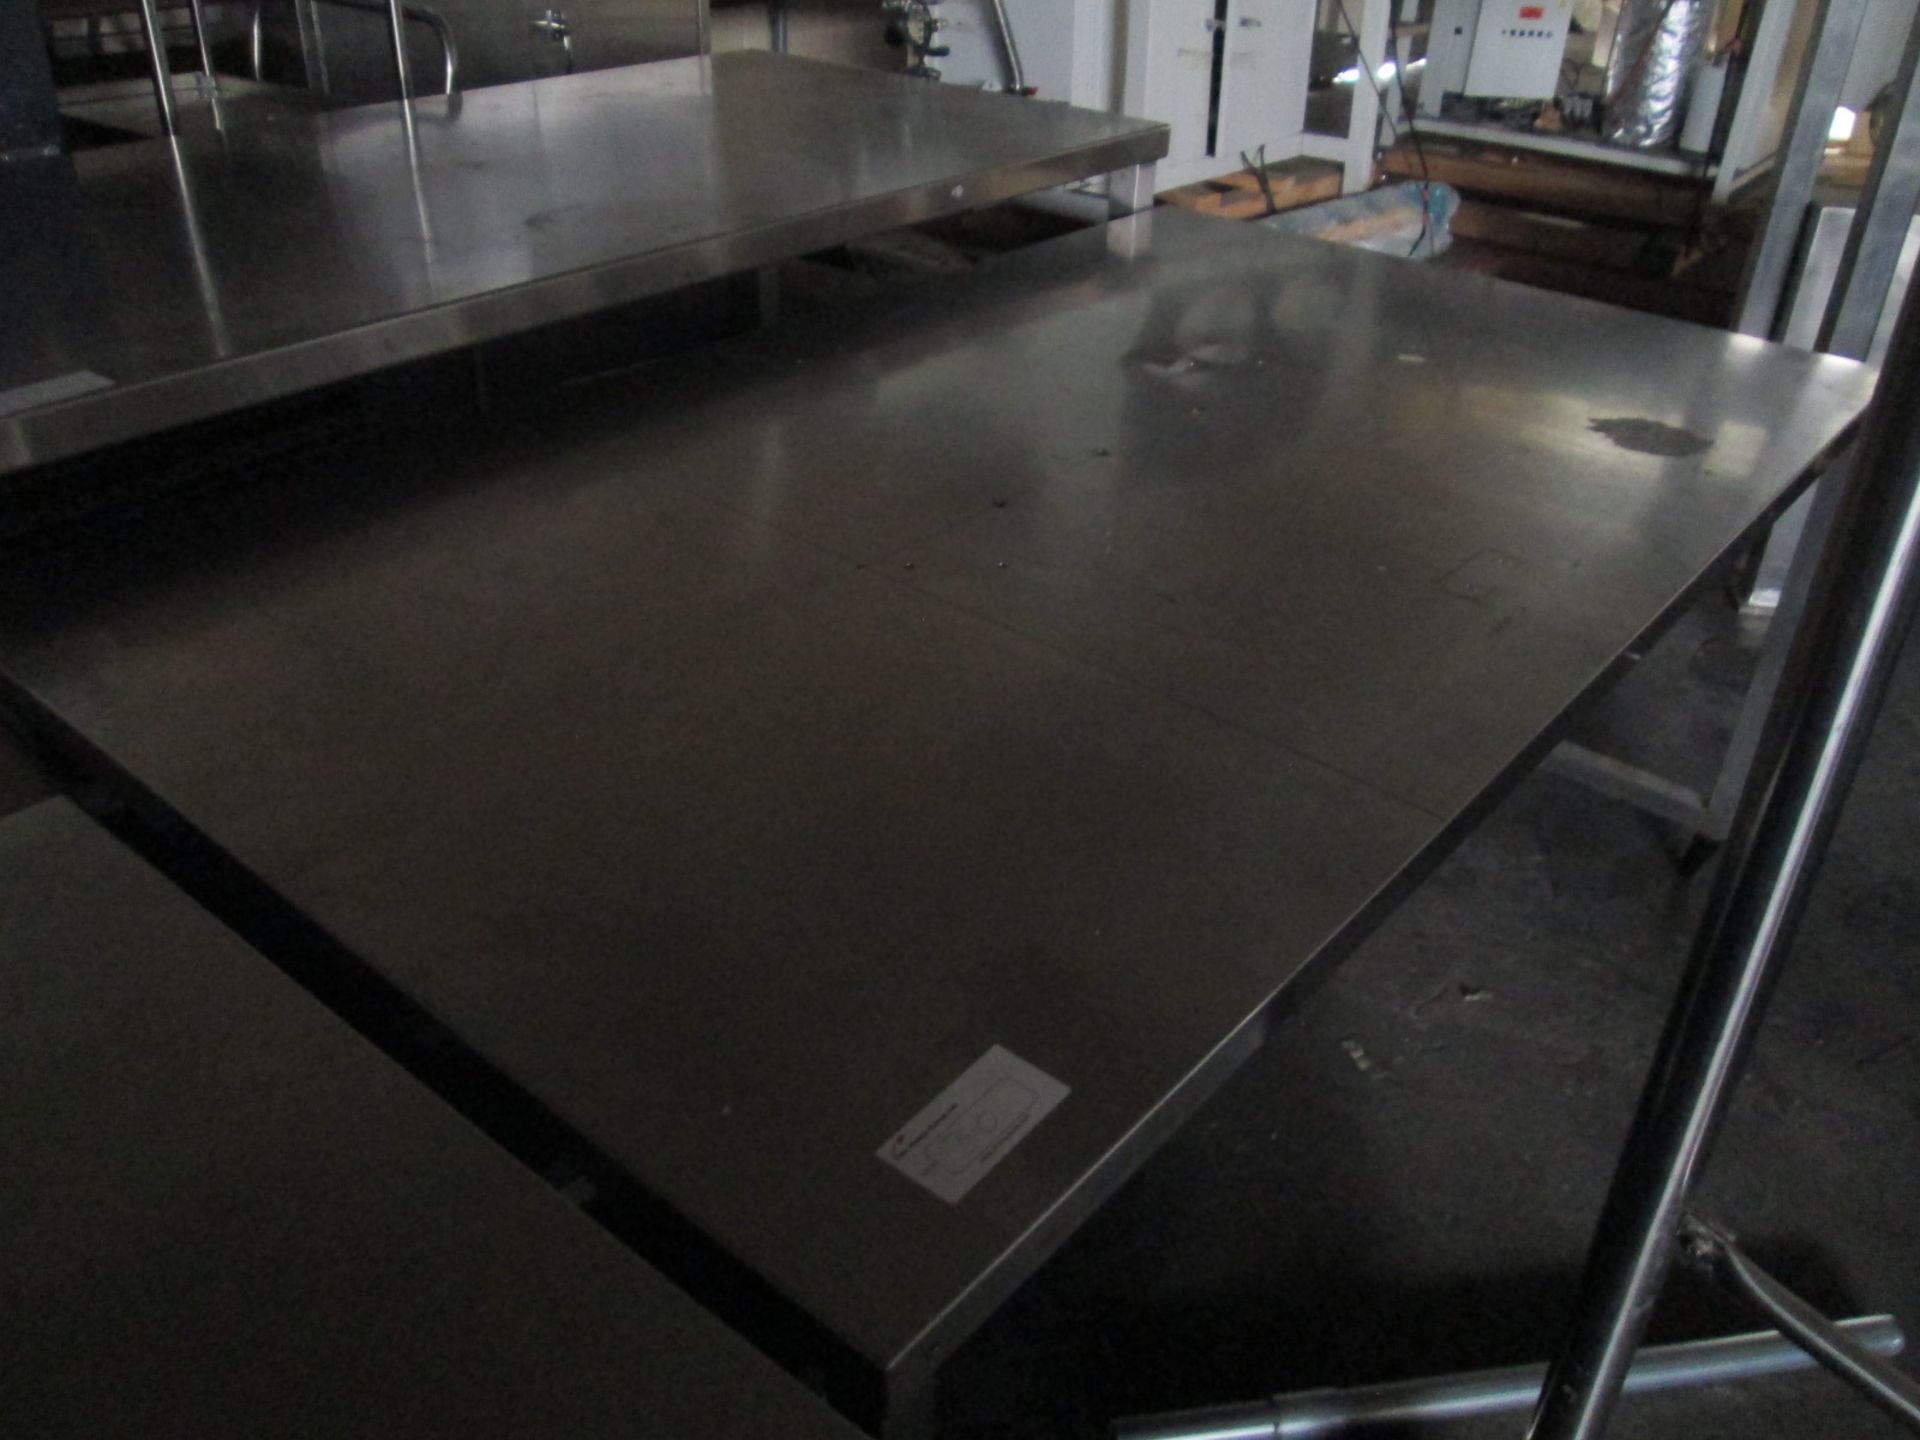 Lot of 5 stainless steel tables: 1x 42" x 72" x 31" high; 1x 36" x 72" x 36" high; 1x 44" x 48" x